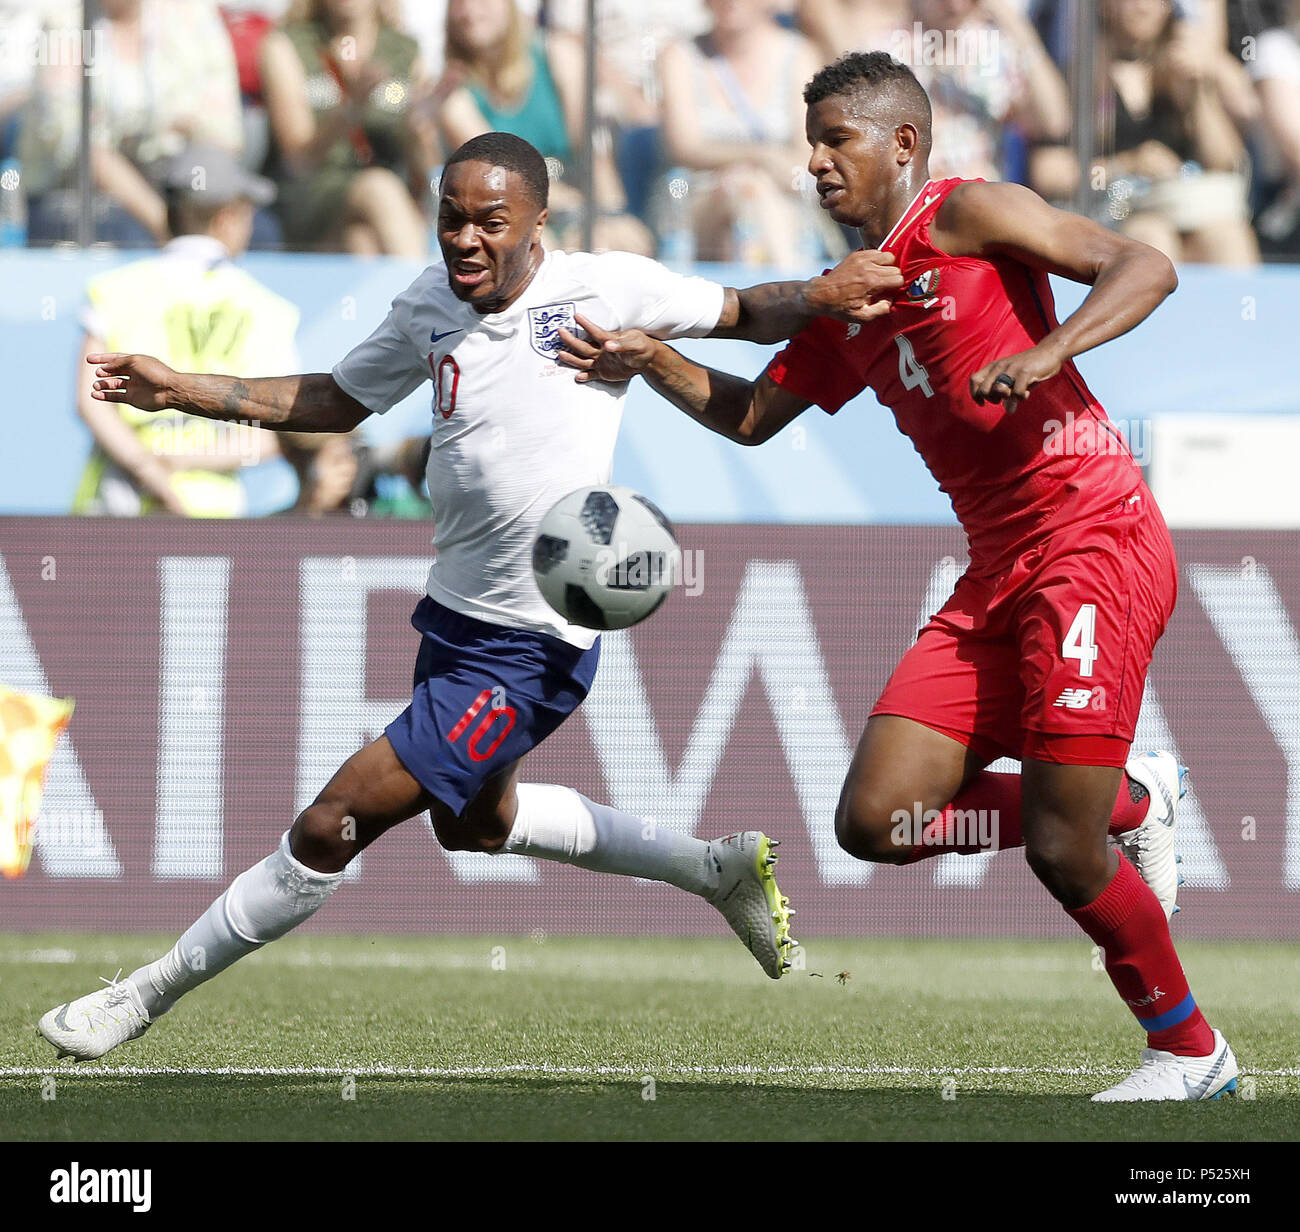 Nizhny Novgorod, Russia. 24th June, 2018. Fidel Escobar (R) of Panama vies with Raheem Sterling of England during the 2018 FIFA World Cup Group G match between England and Panama in Nizhny Novgorod, Russia, June 24, 2018. Credit: Cao Can/Xinhua/Alamy Live News Stock Photo